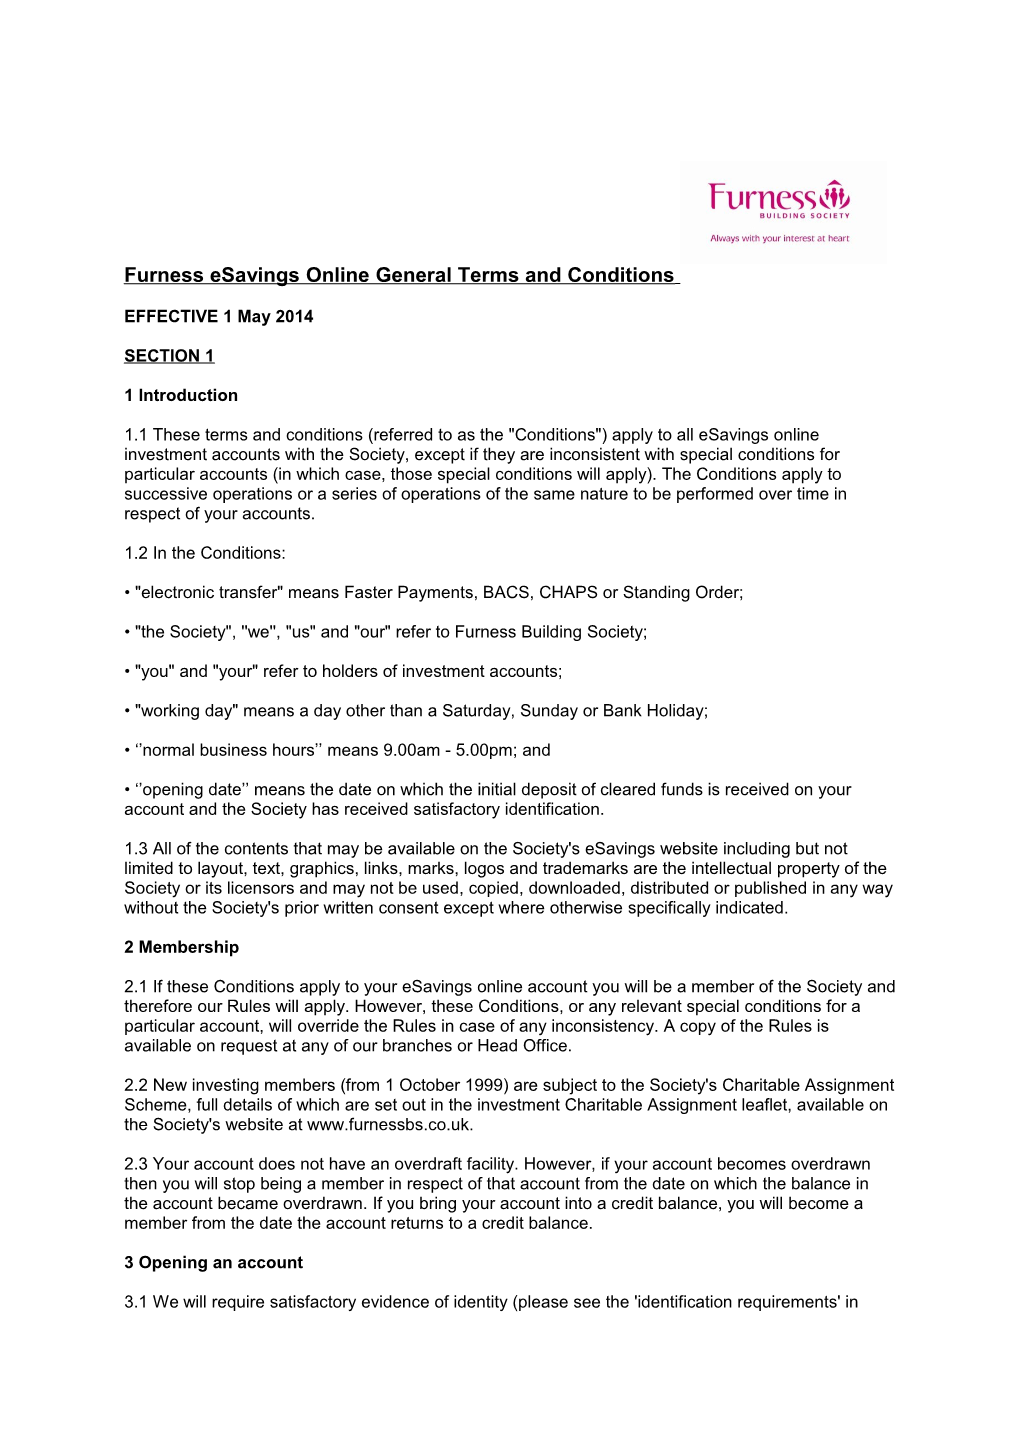 Furness Esavings Online General Terms and Conditions EFFECTIVE 1 May 2014 SECTION 1 1